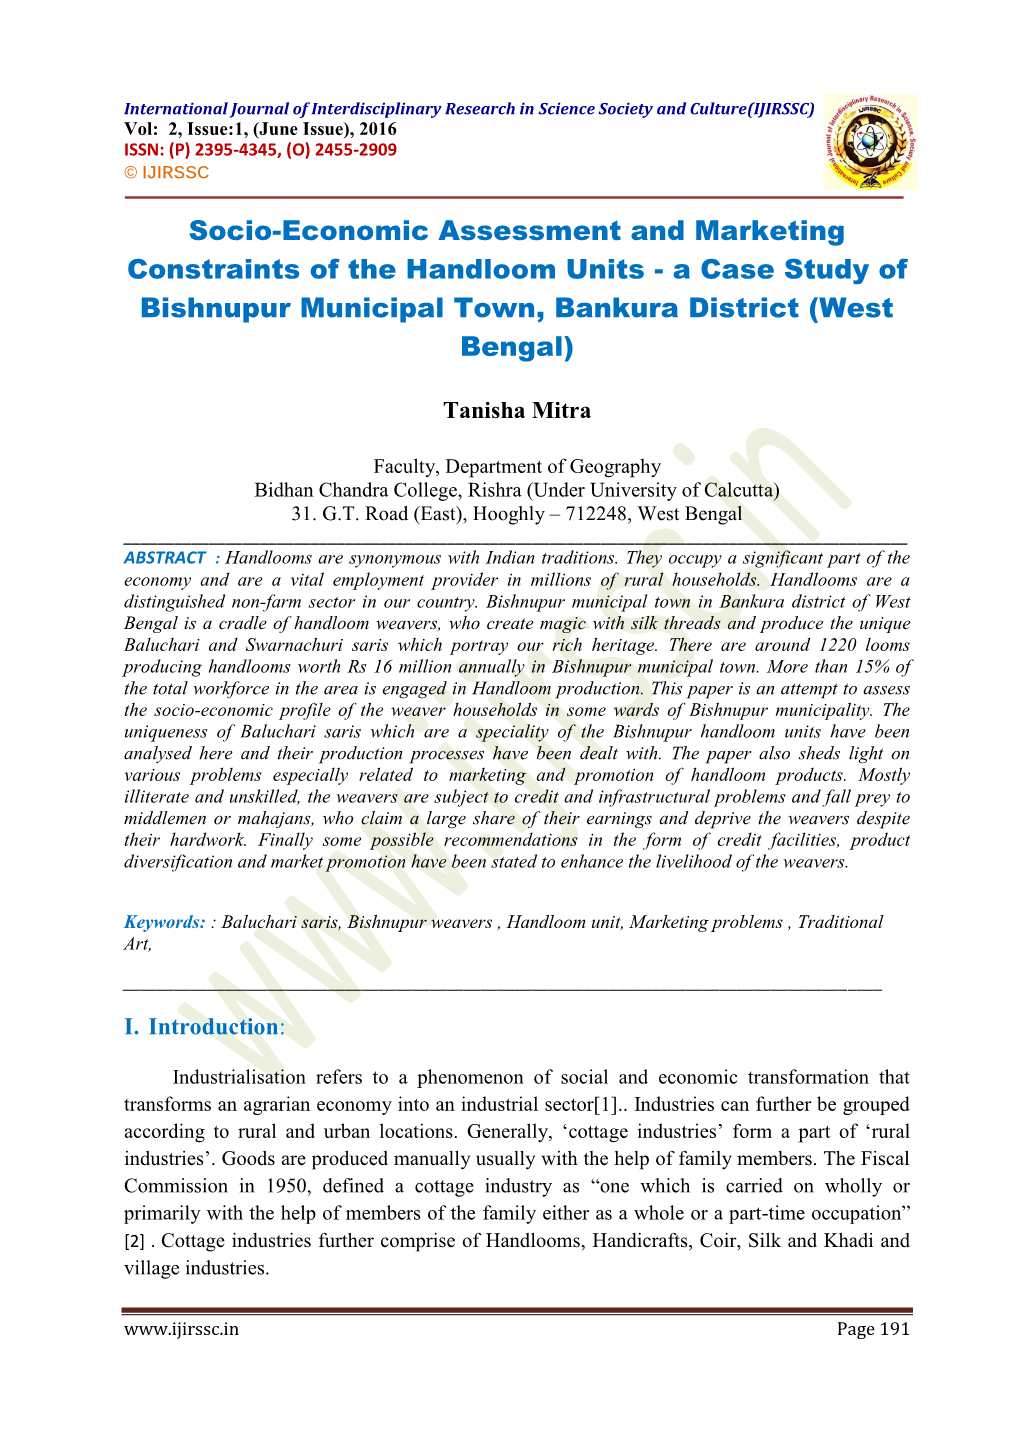 Socio-Economic Assessment and Marketing Constraints of the Handloom Units - a Case Study of Bishnupur Municipal Town, Bankura District (West Bengal)